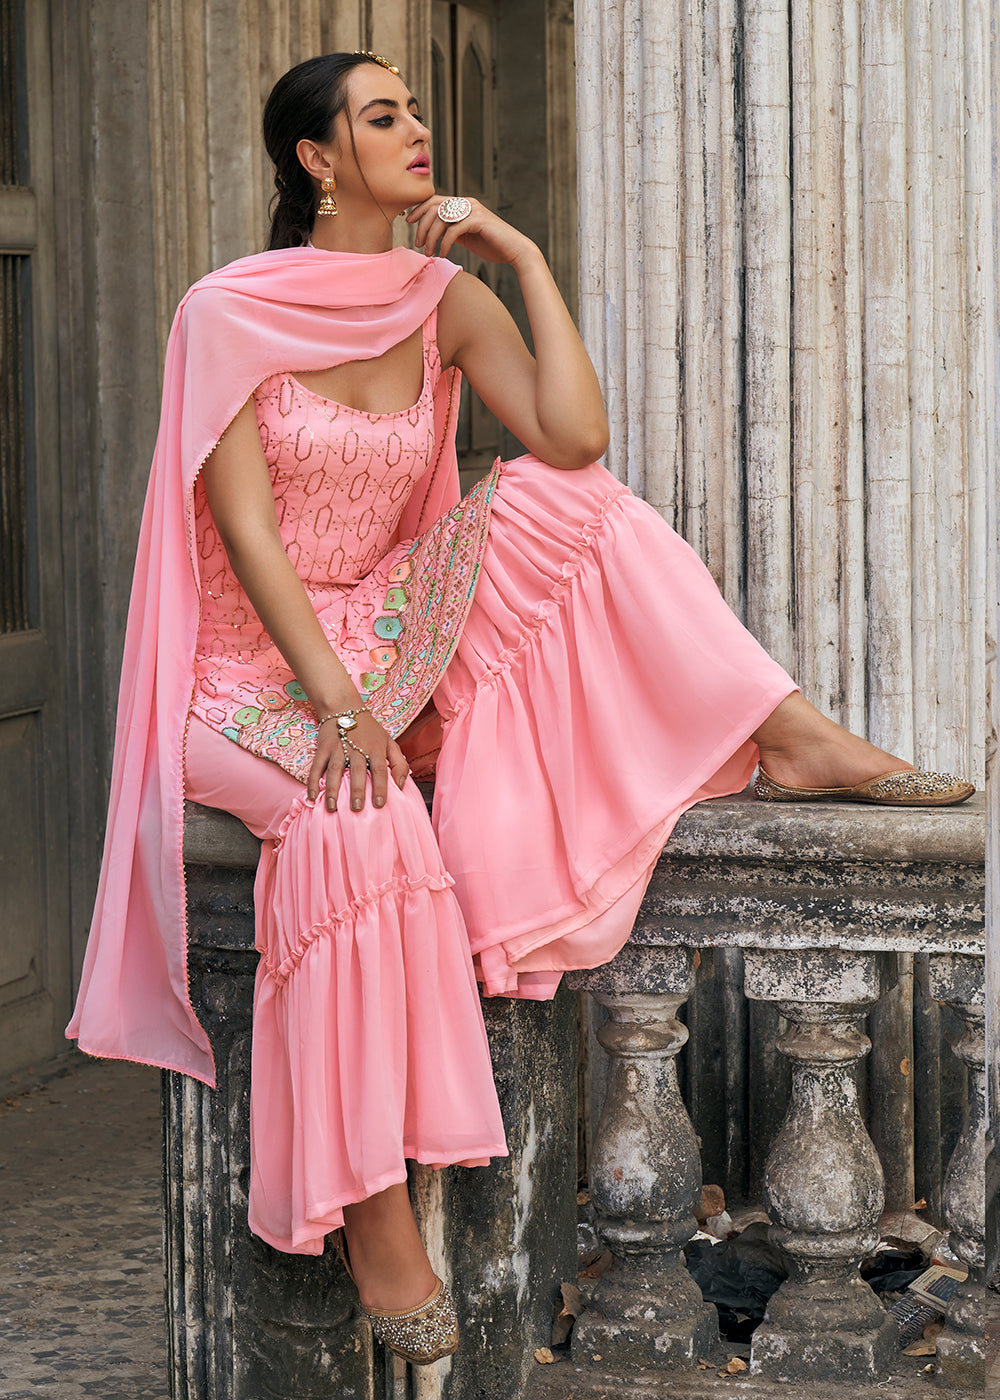 Shop Now Coral Pink Faux Georgette Festive Gharara Style Suit Online at Empress Clothing in USA, UK, Canada, Italy & Worldwide.